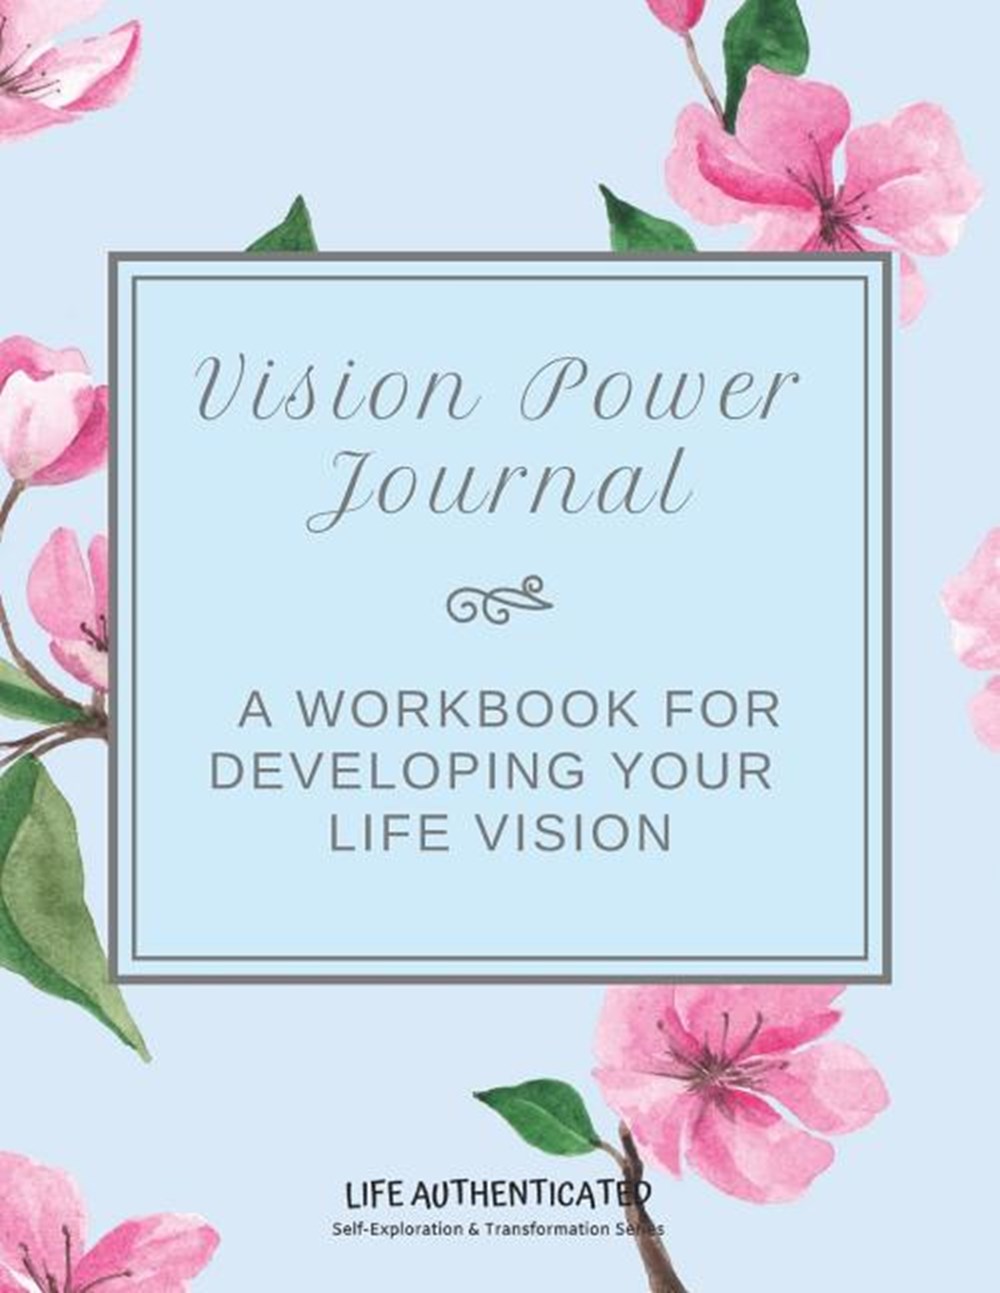 Vision Power Journal A Workbook for Developing your Life Vision